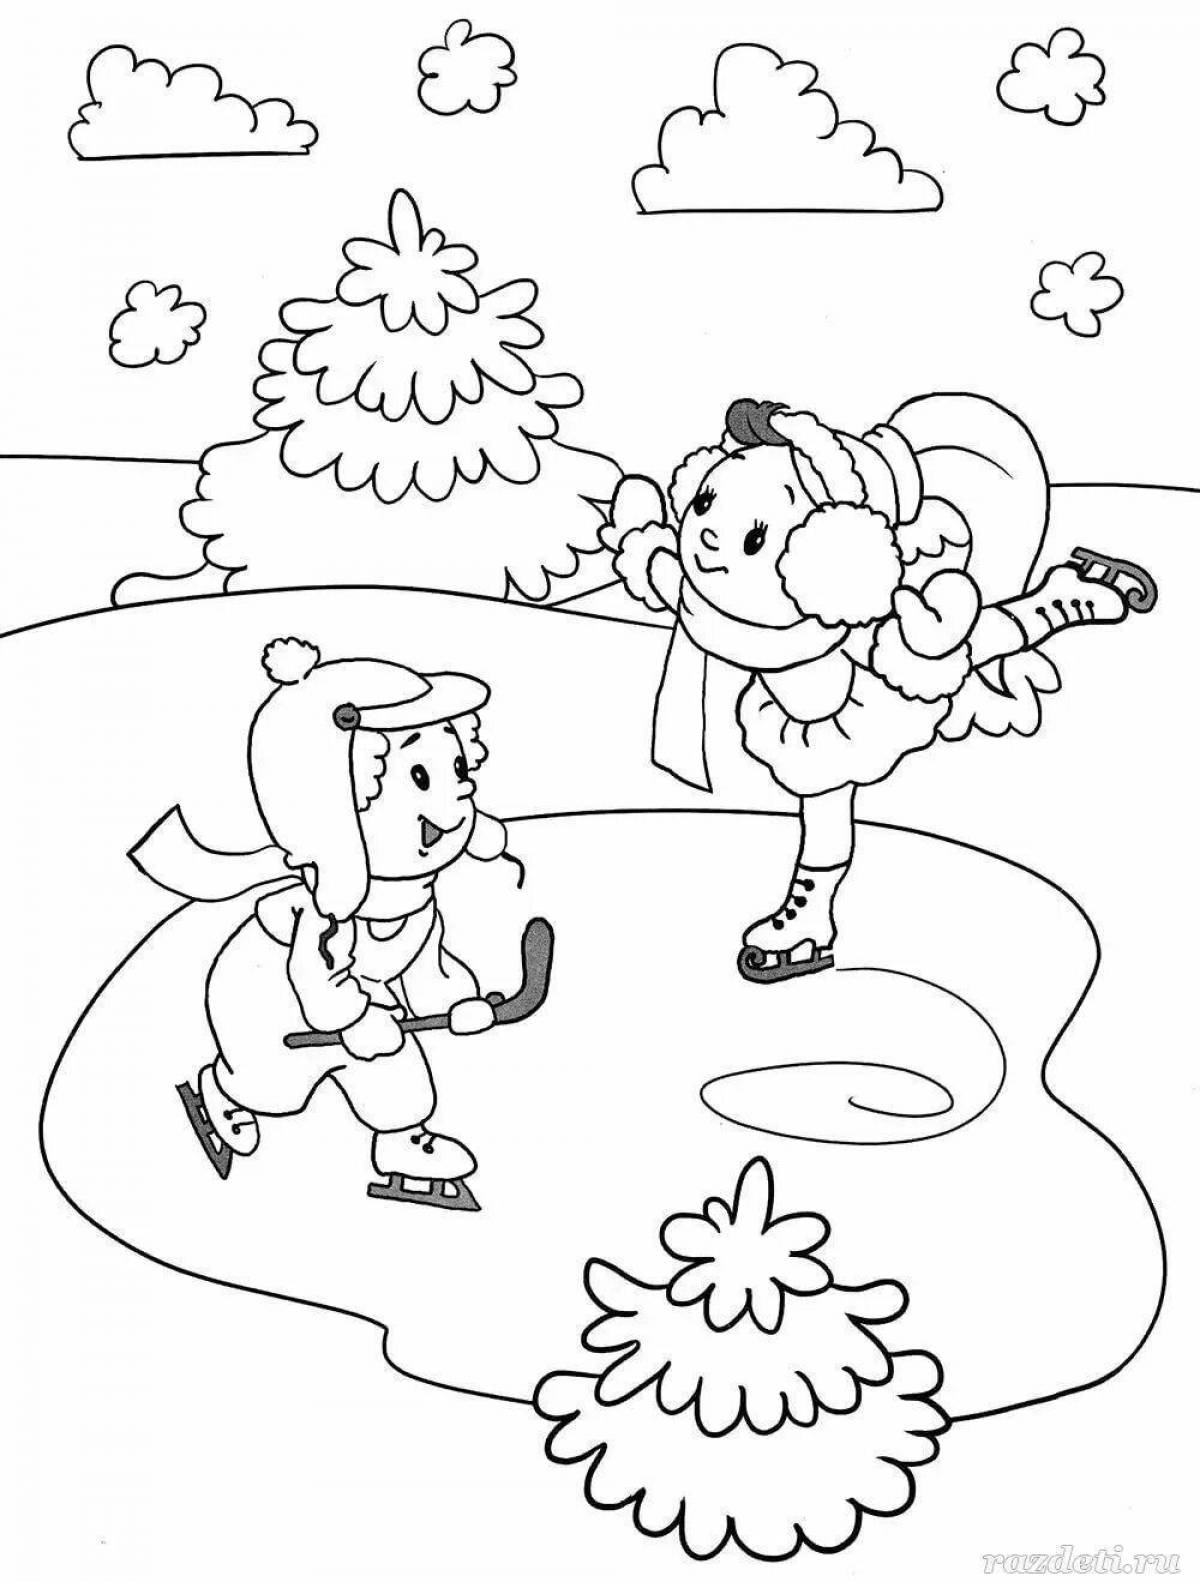 Children's winter holidays playful coloring book